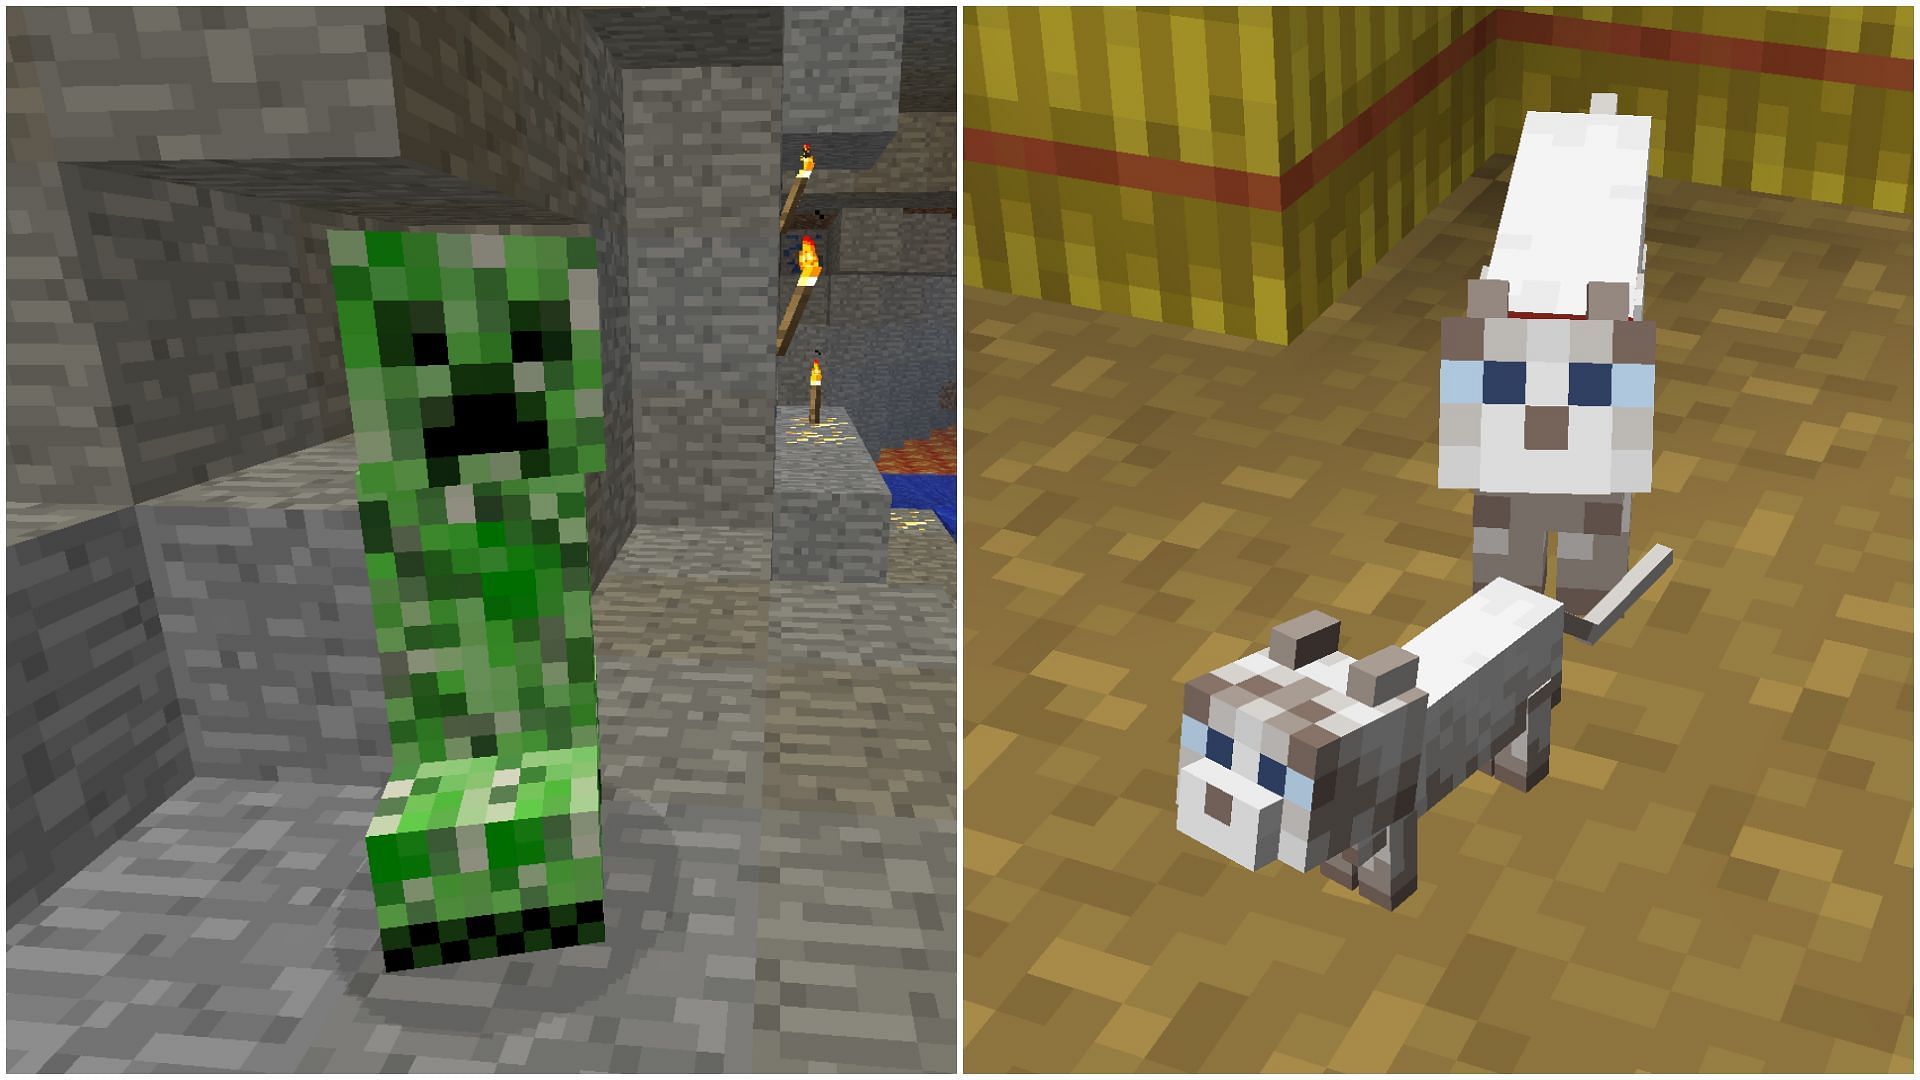 Cats will scare creepers away in Minecraft (Image via Mojang)